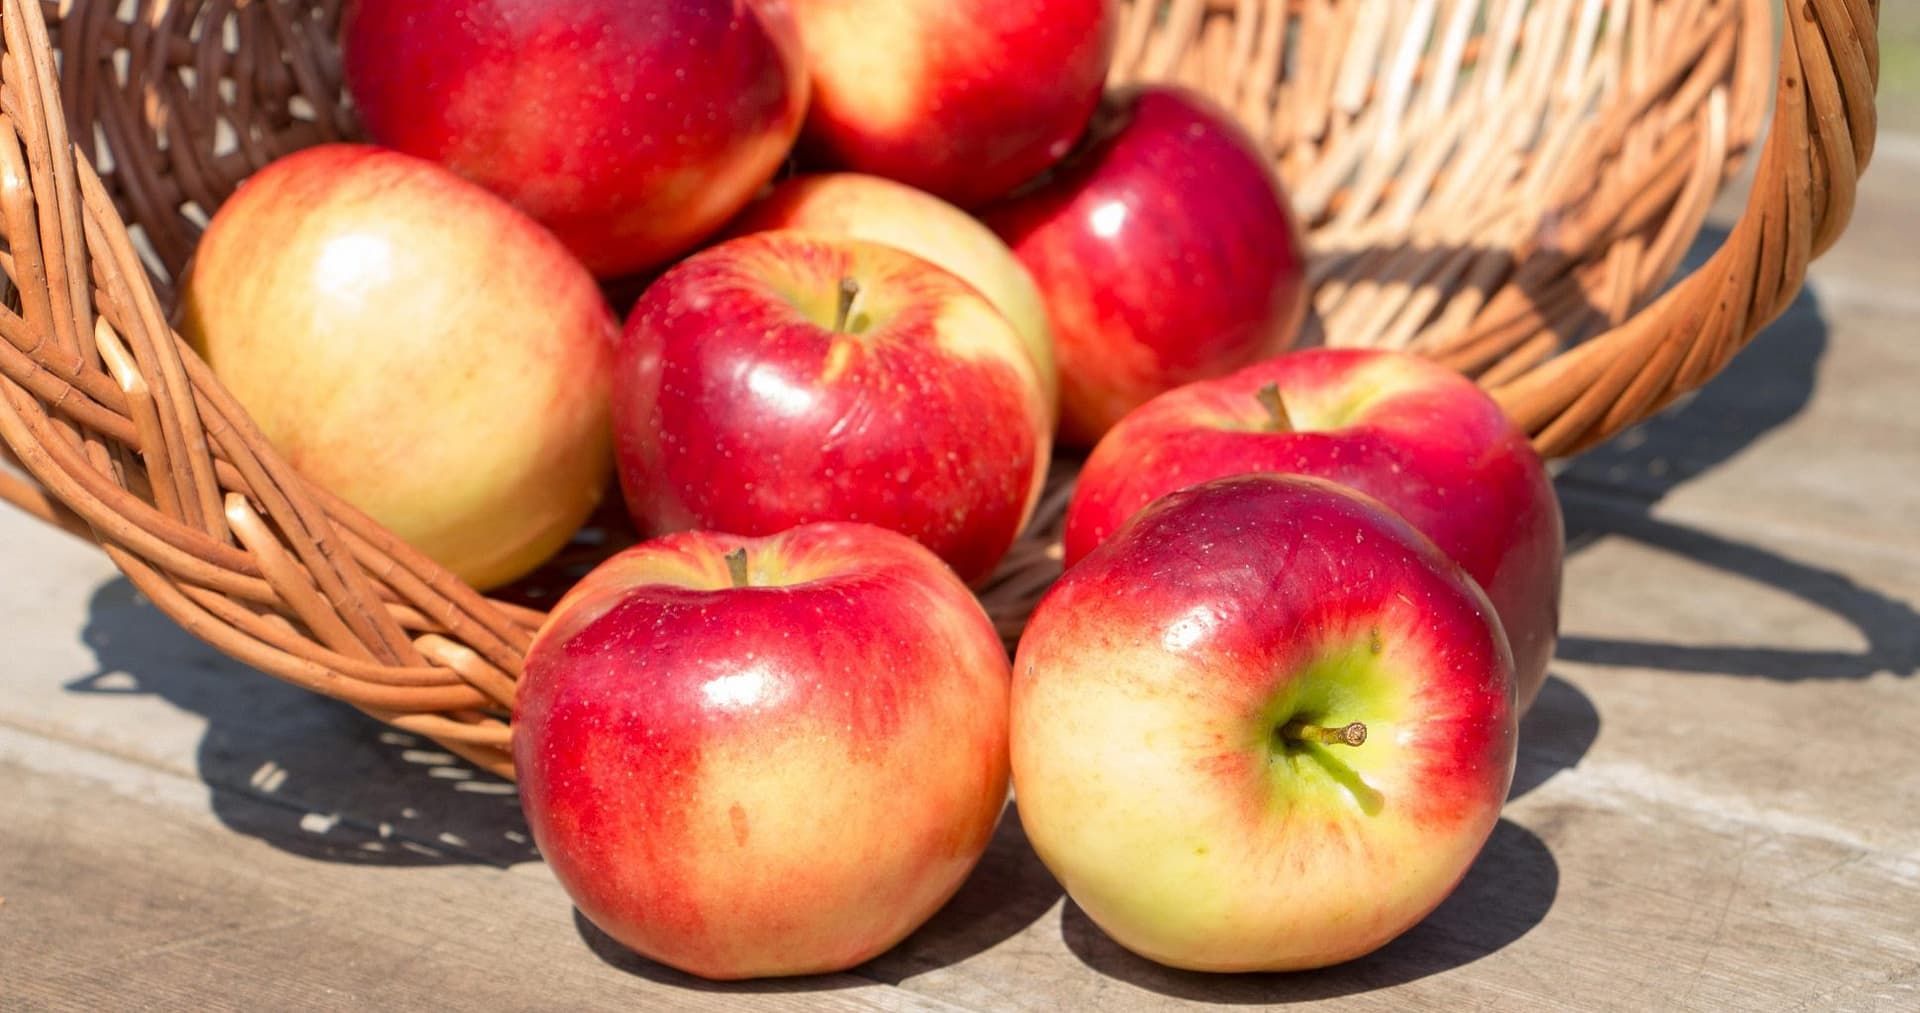 How To Store Apples For Long Shelf Life?